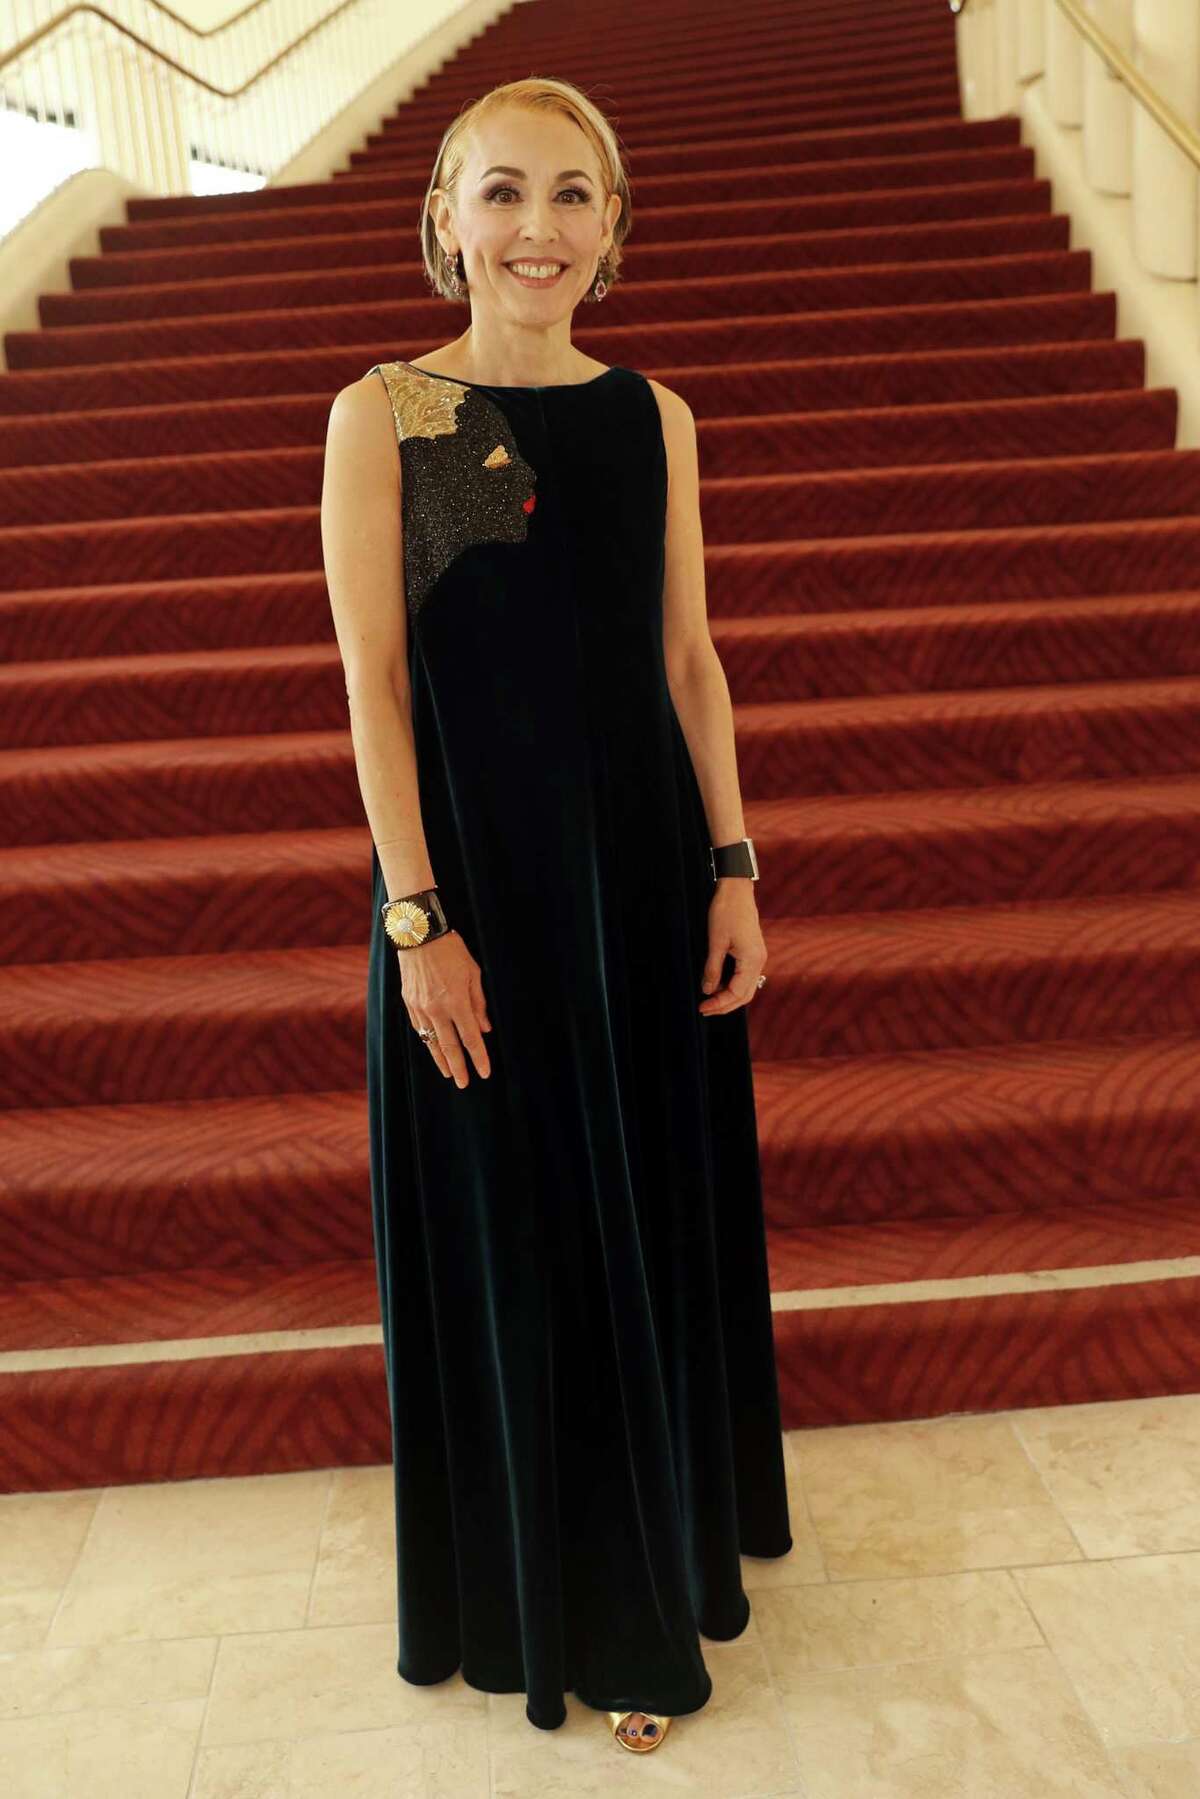 Symphony president Sakurako Fisher in Schiaparelli couture before the Symphony gala at Davies Symphony Hall in San Francisco on Sept. 5, 2018.